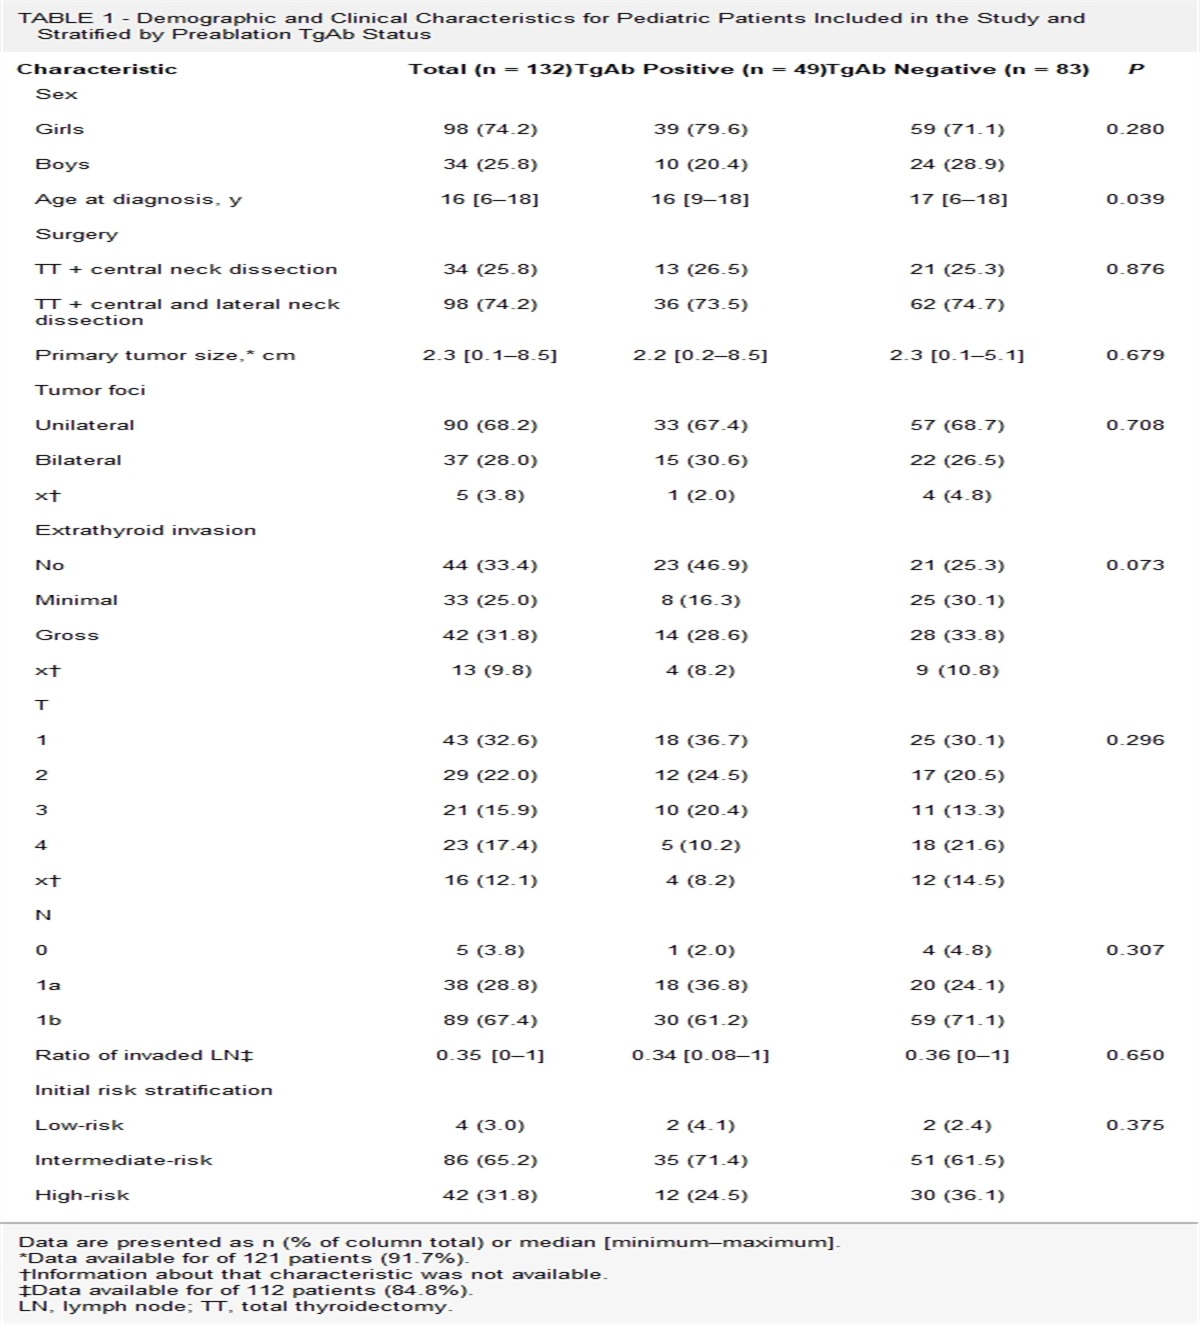 No Association of Preablation Thyroglobulin Antibody Positivity and Outcome in Pediatric Patients With Papillary Thyroid Carcinoma